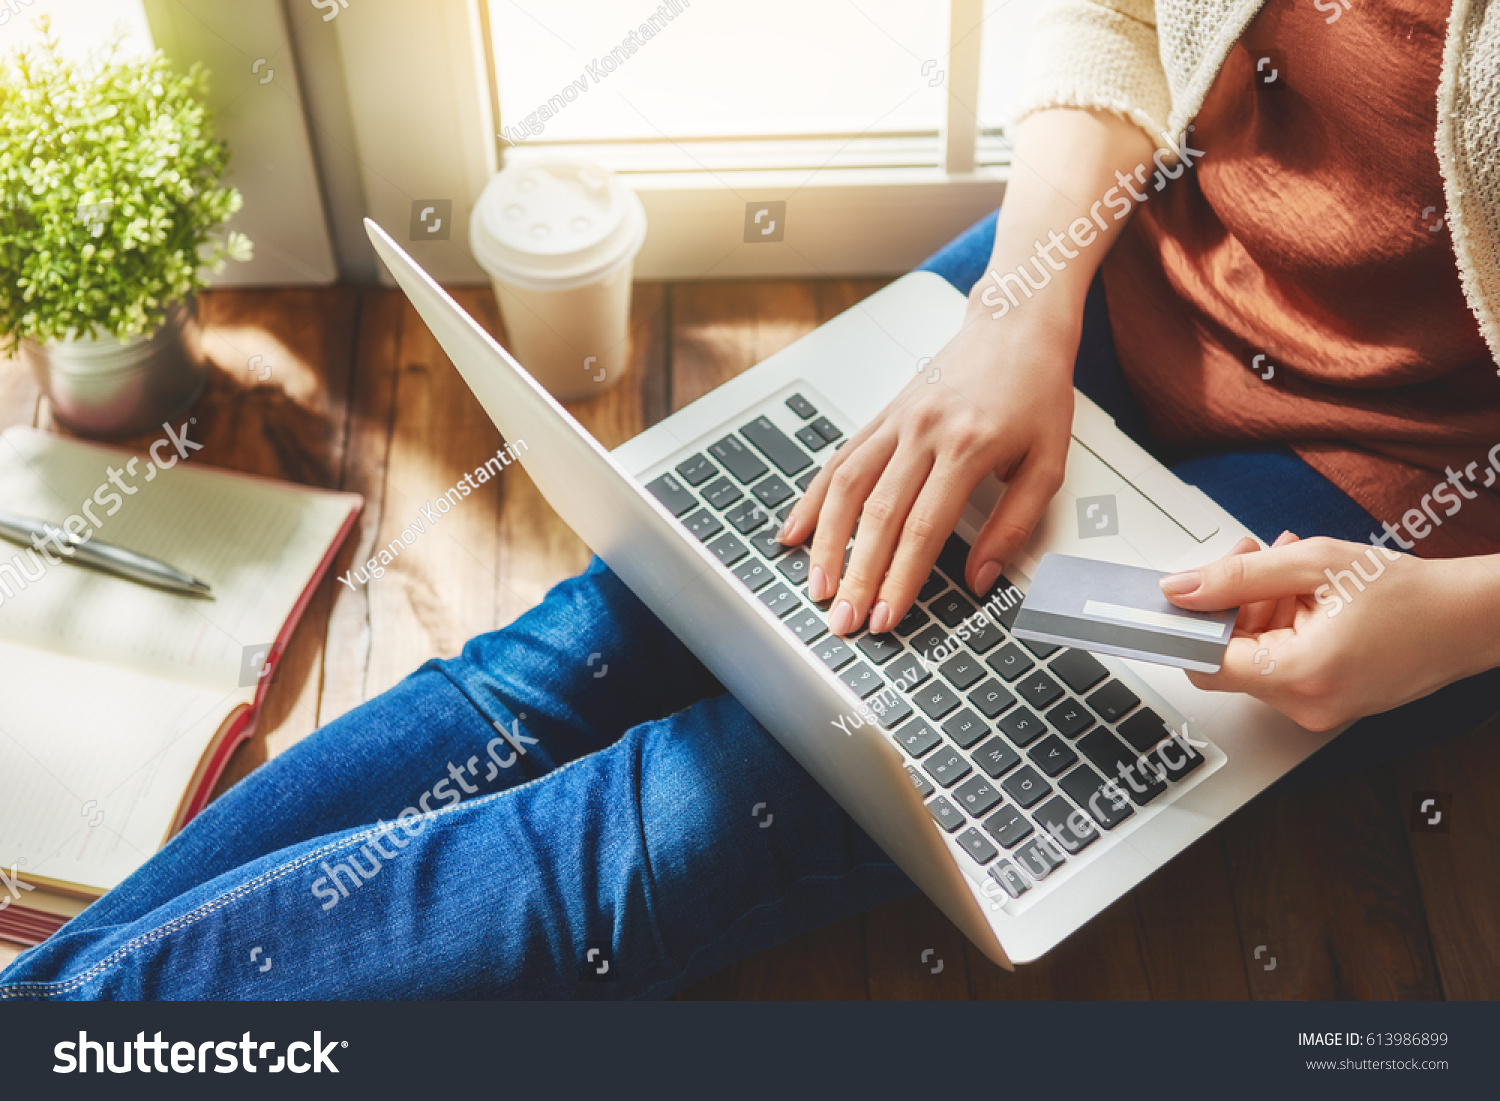 Woman is holding credit card and using laptop computer. Online shopping concept. Close up. #613986899